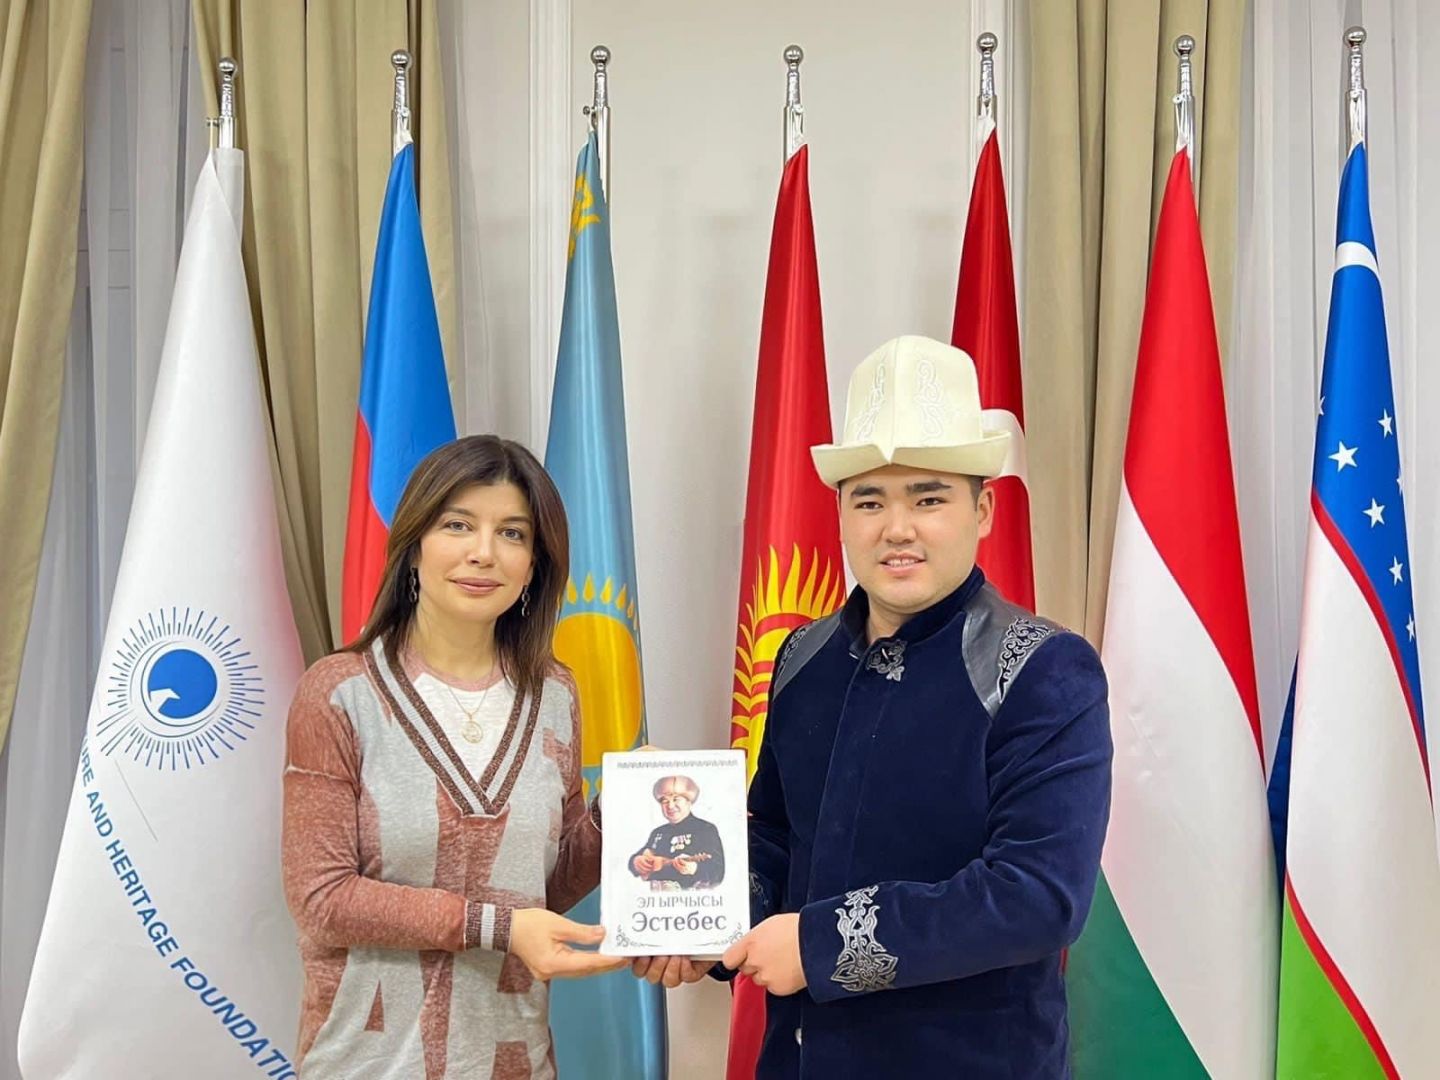 Turkic Culture & Heritage Foundation head meets young writers from Turkic-speaking nations [PHOTO]